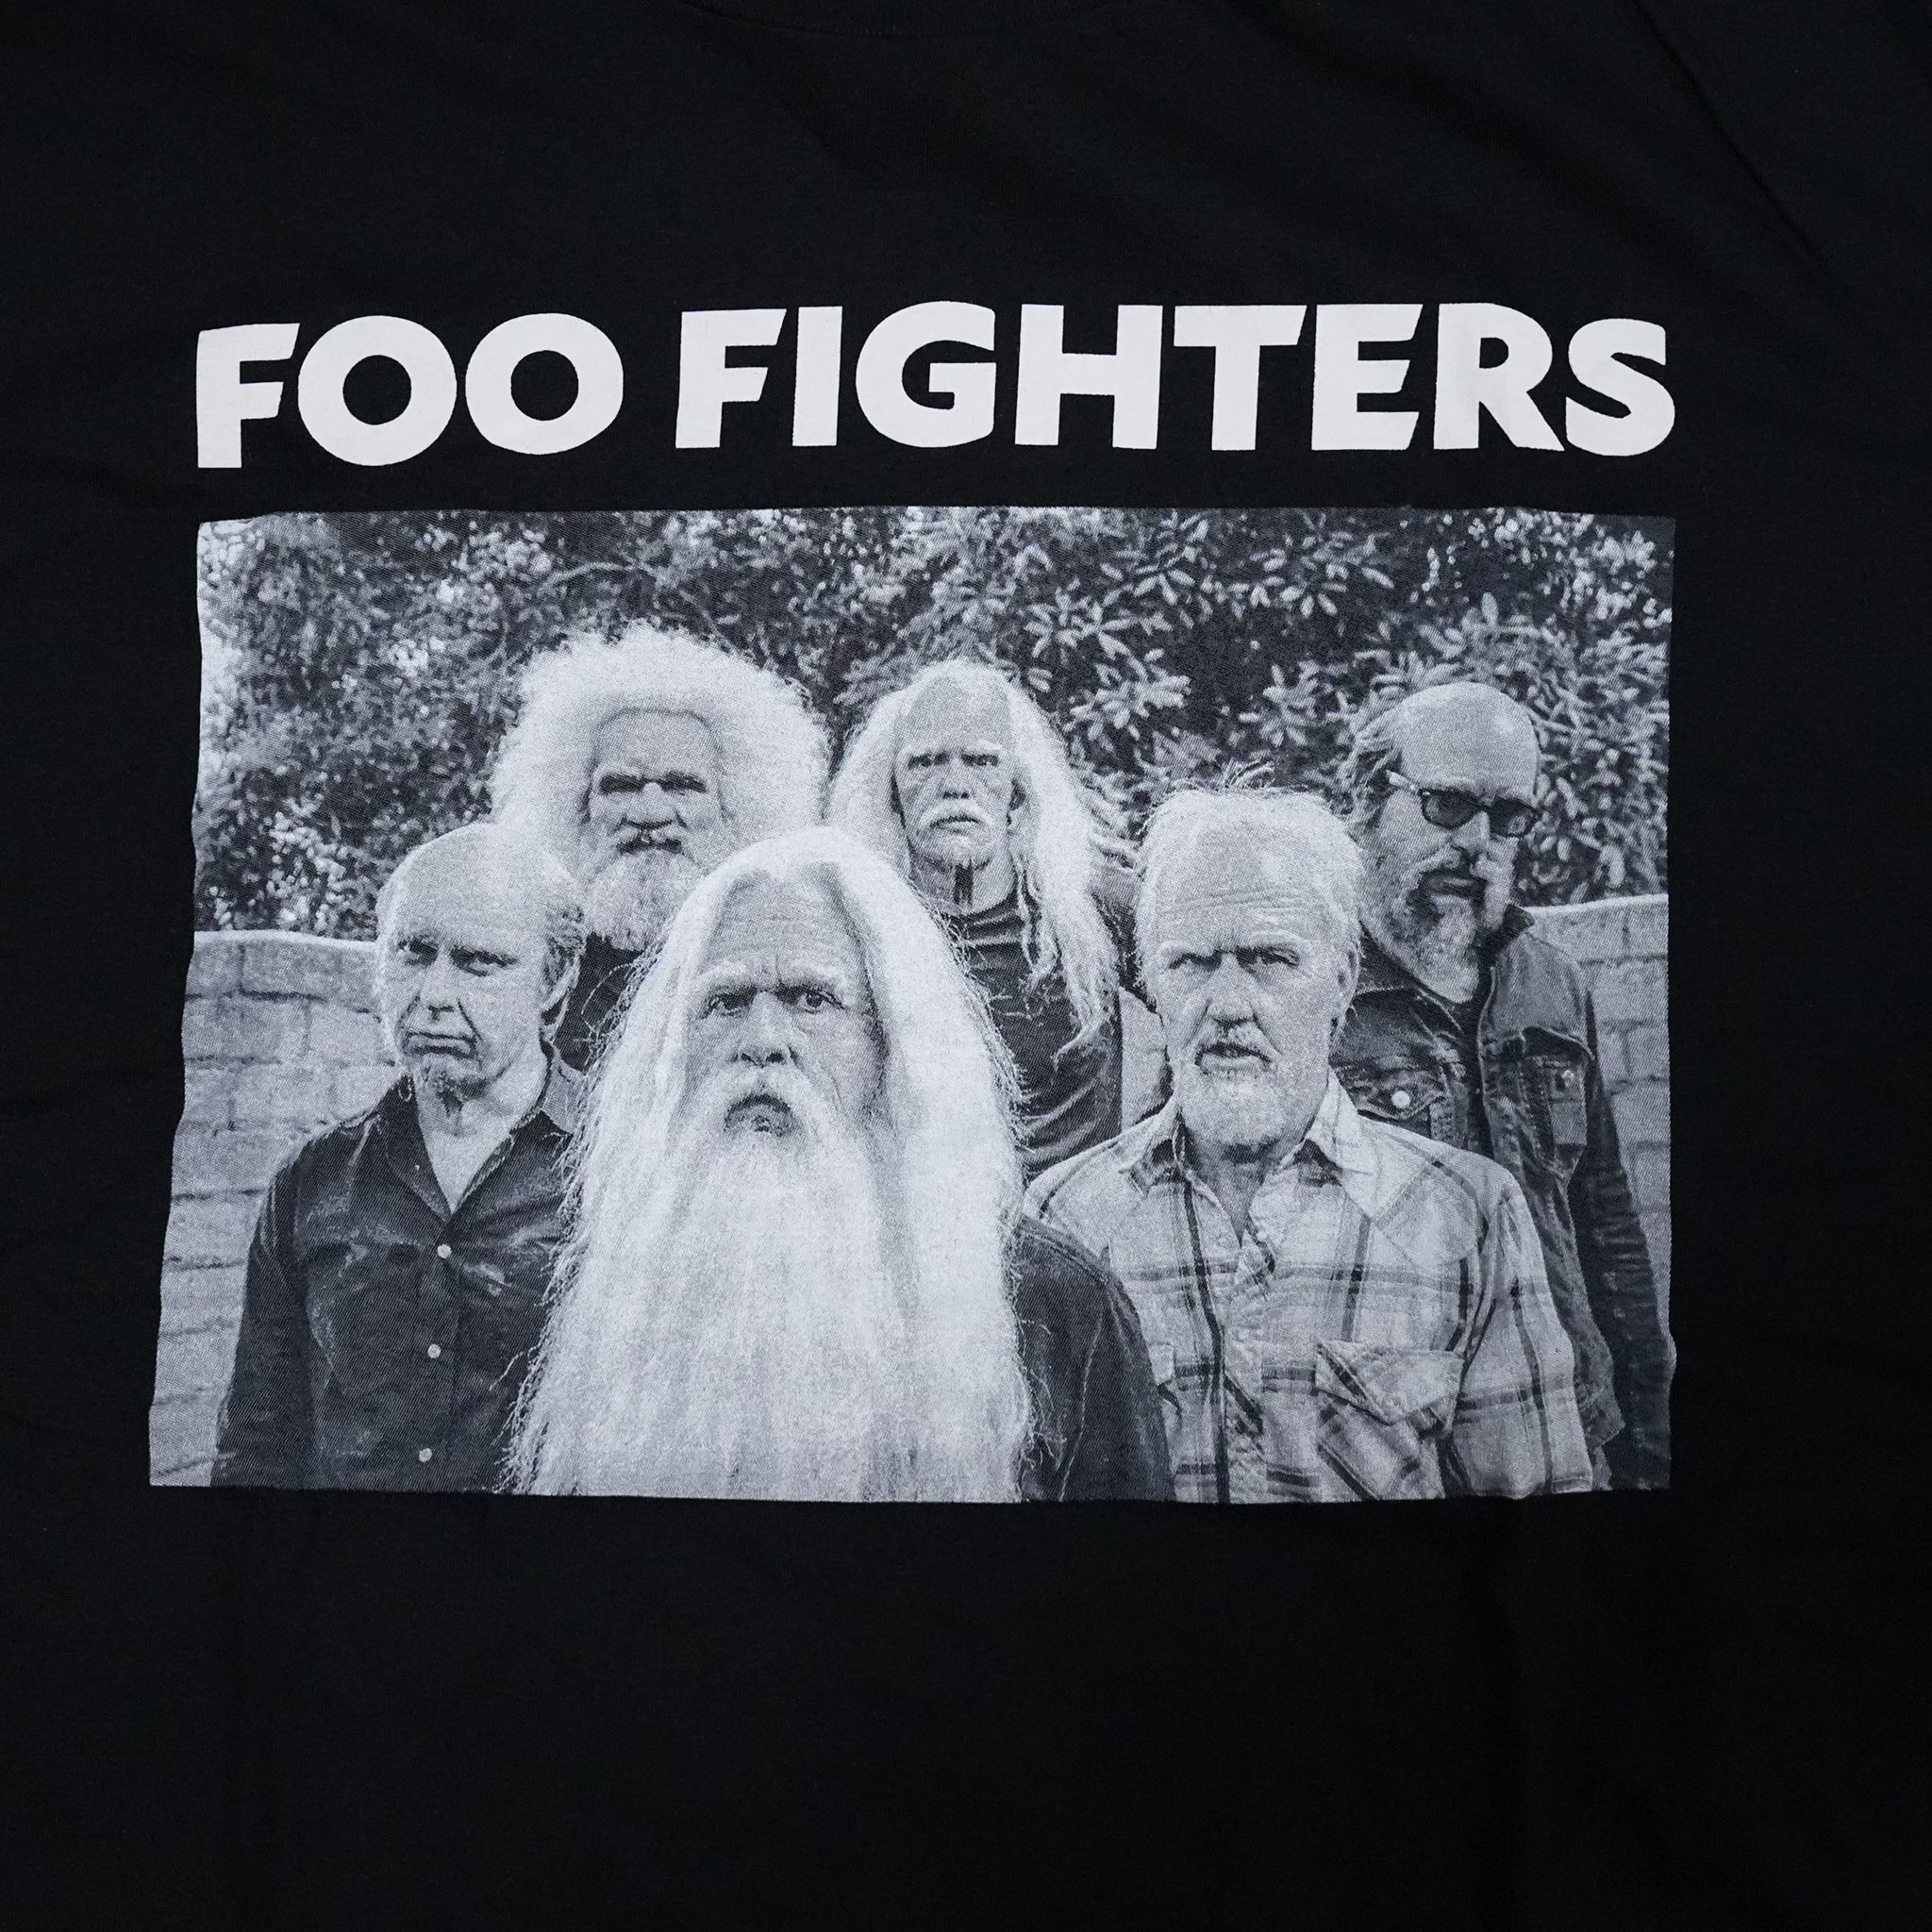 Name:FooFighters_Old Band Photo_Unisex_Black【ROCK OFF】【ネコポス選択可能】